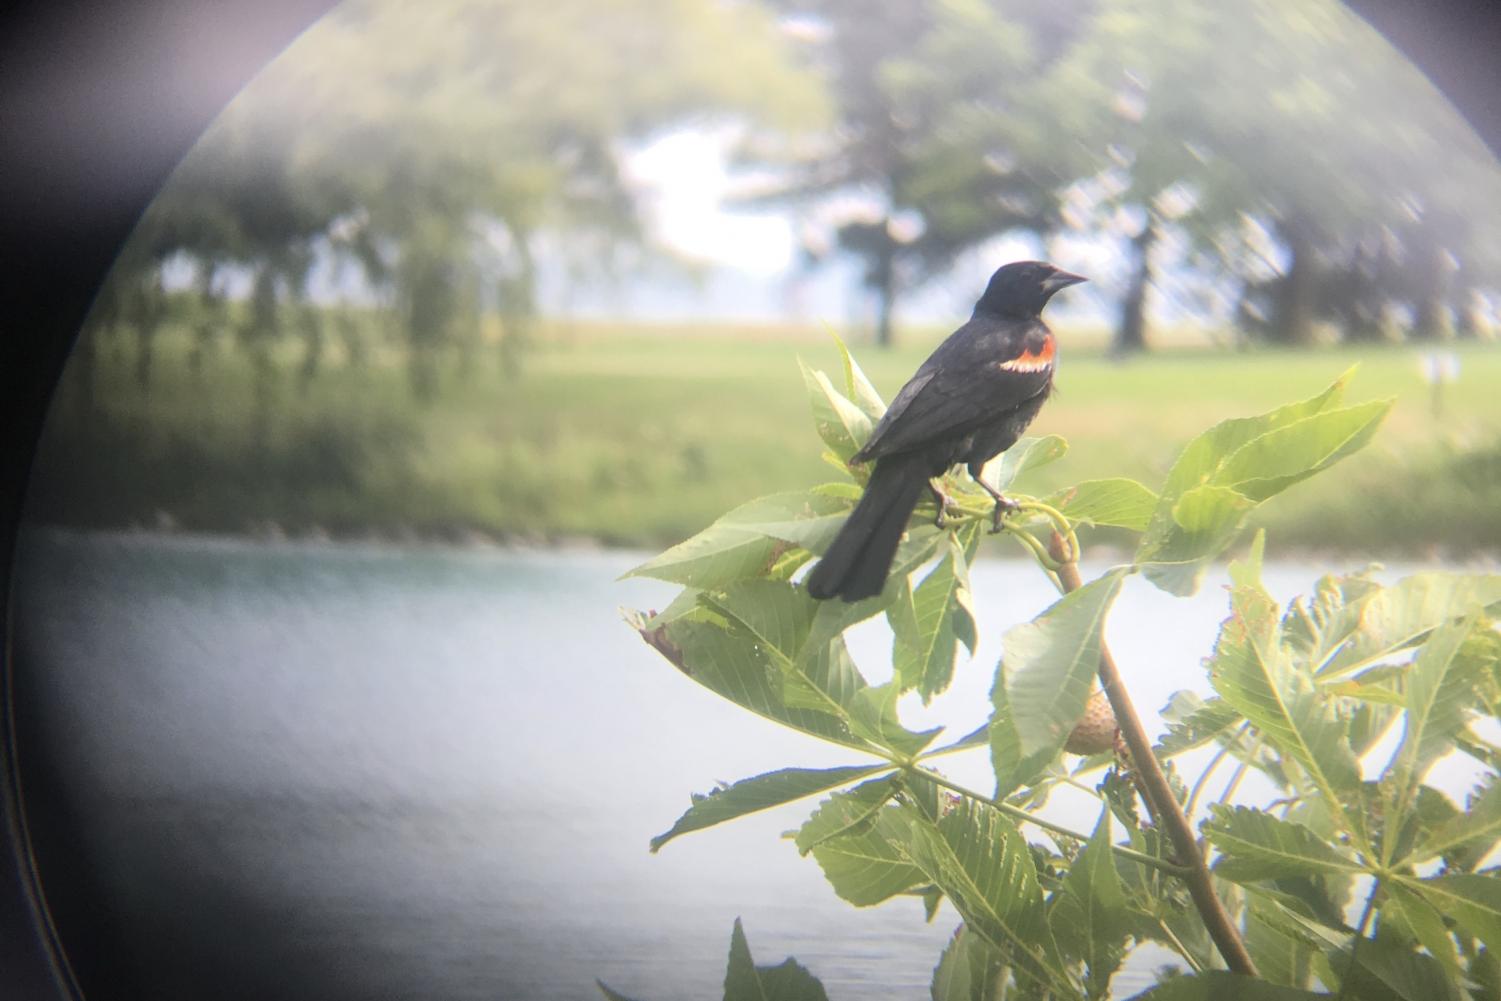 A+black+bird+with+red+feathers+on+its+chest+perches+on+top+of+green+leaves.+In+the+background+are+blue+waters.